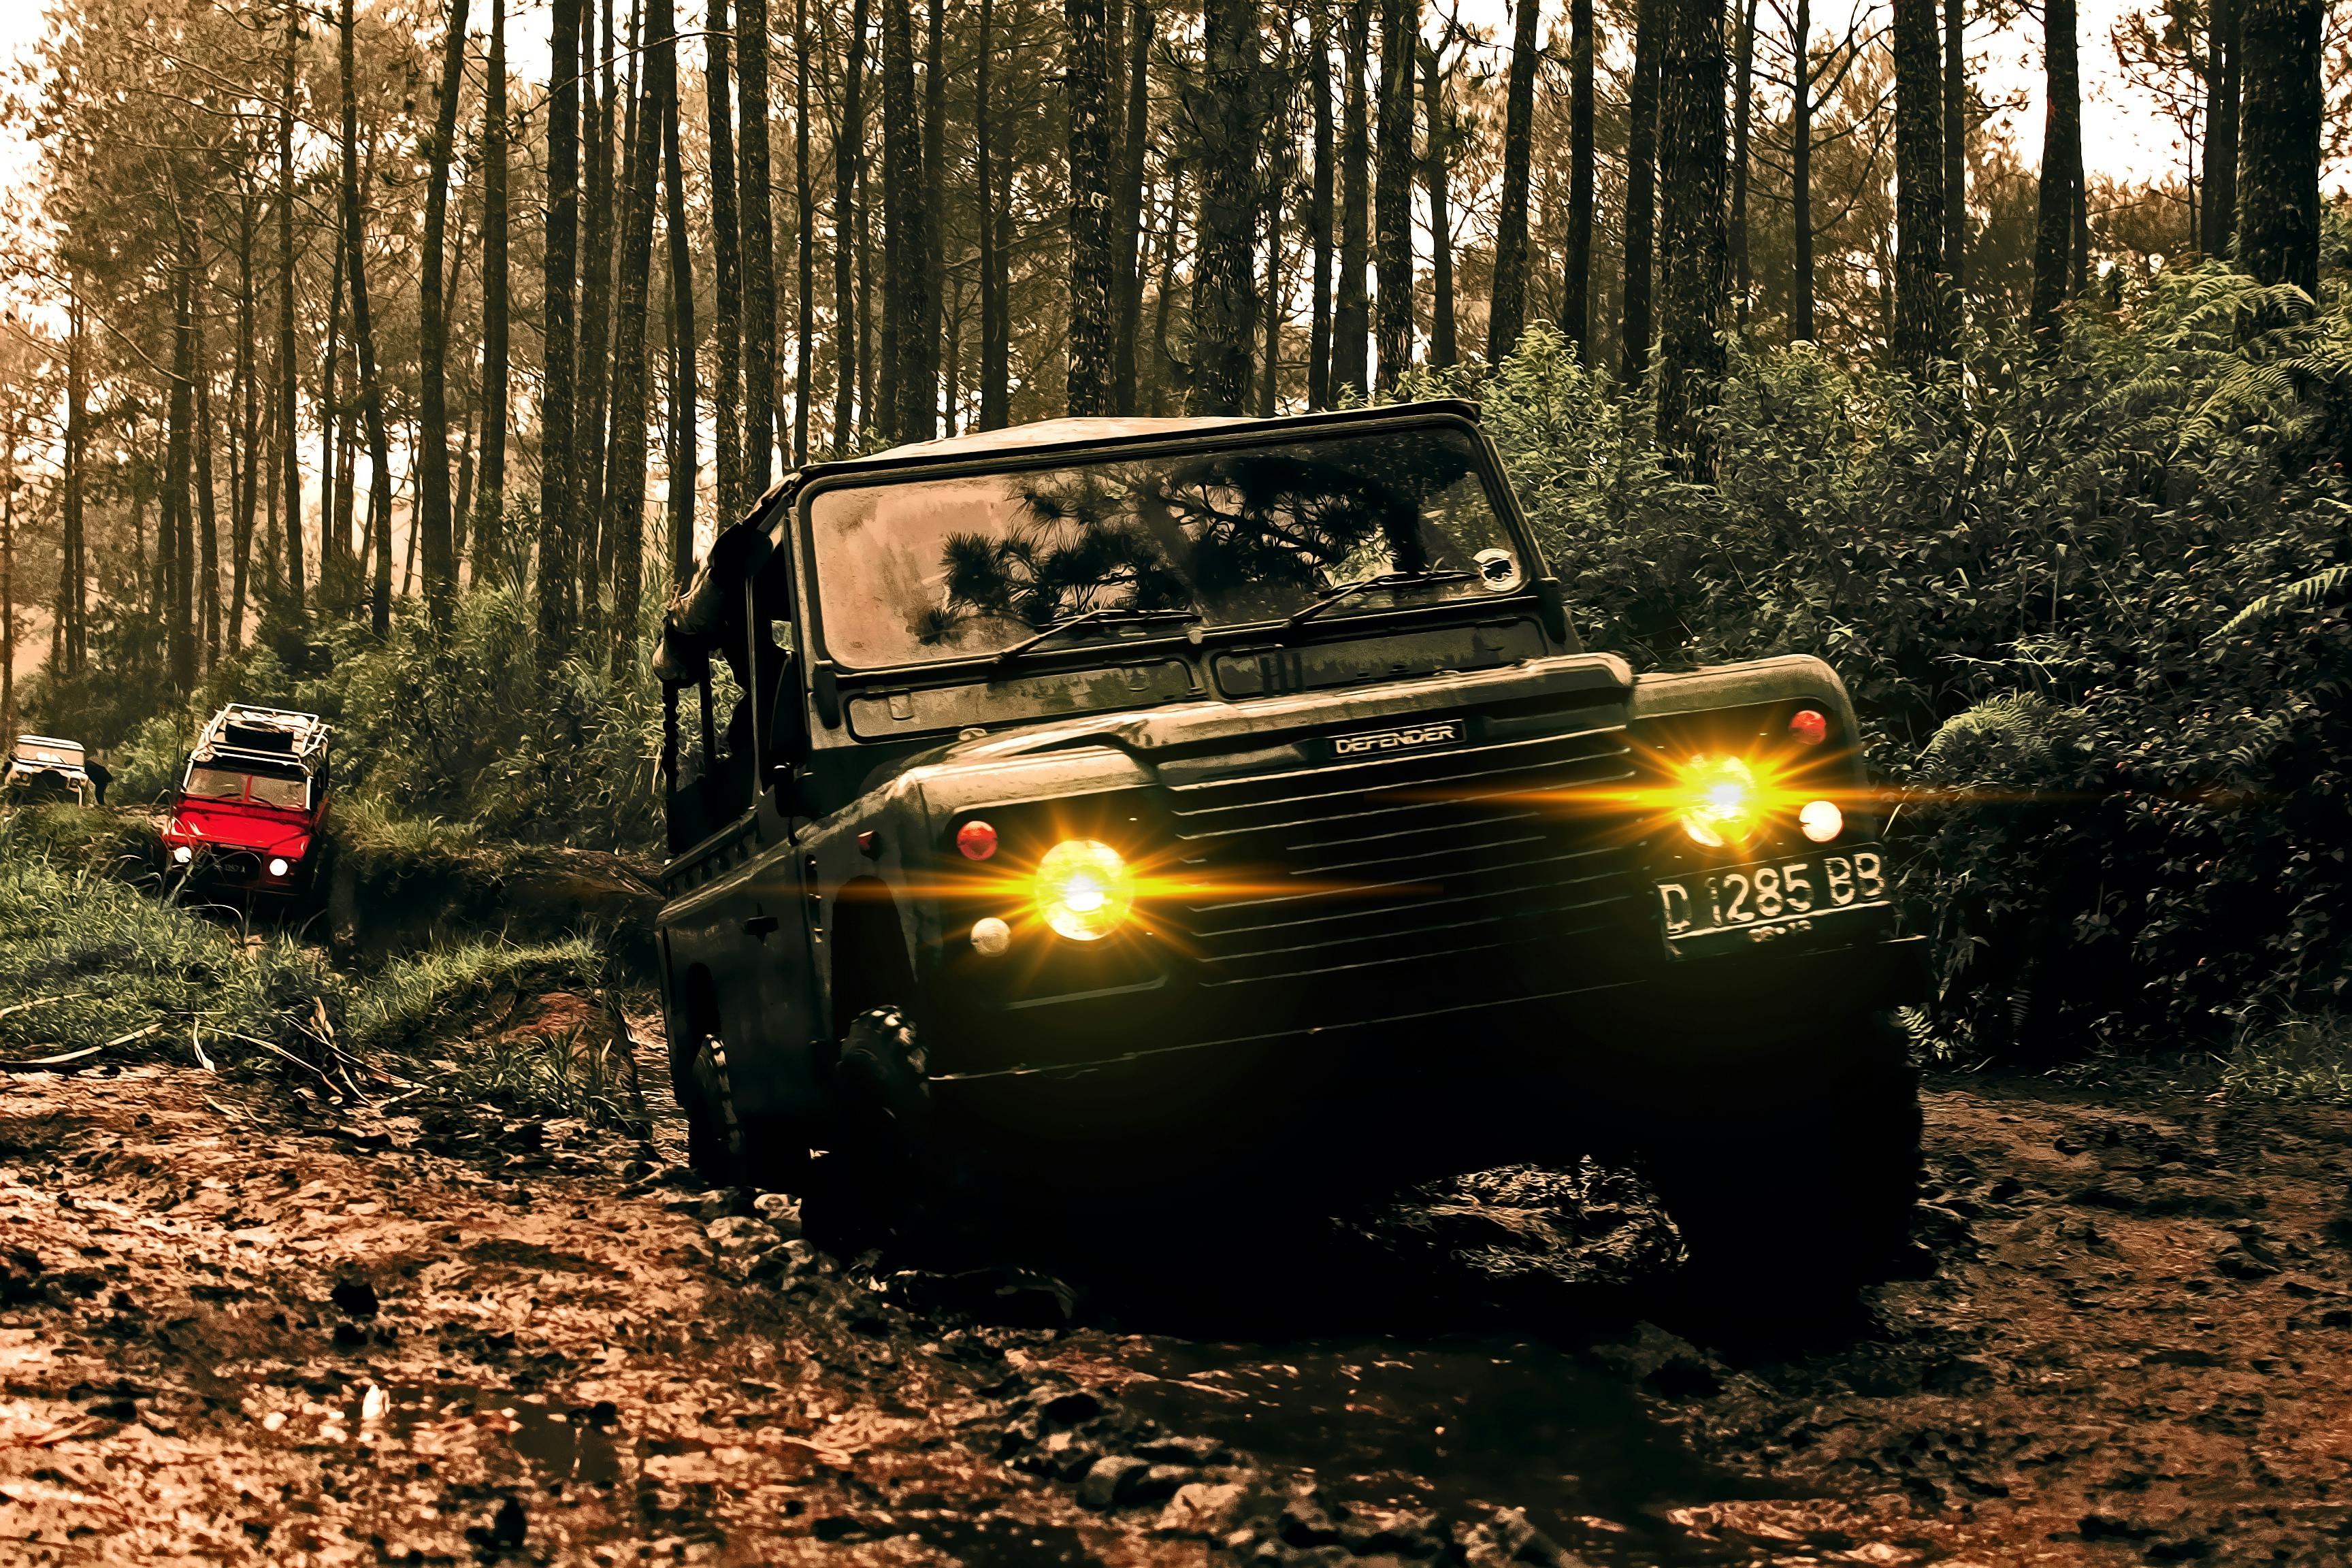 Off Road Photos Download The BEST Free Off Road Stock Photos  HD Images